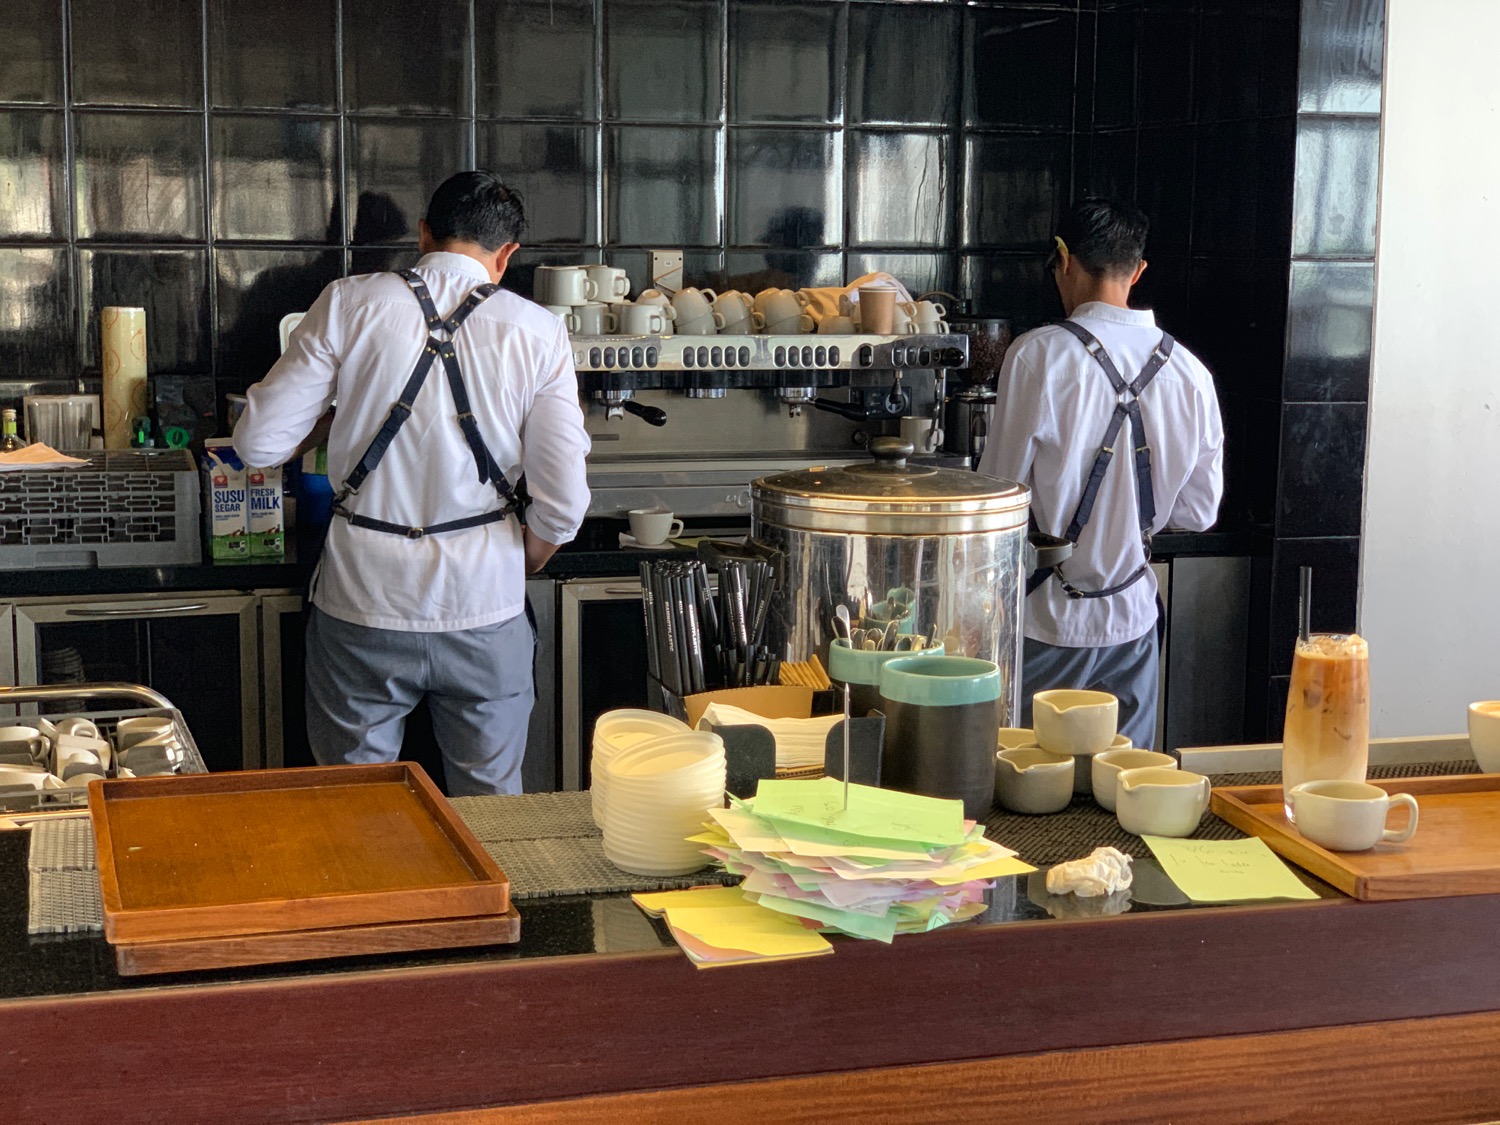 two men in white uniforms working at a coffee machine